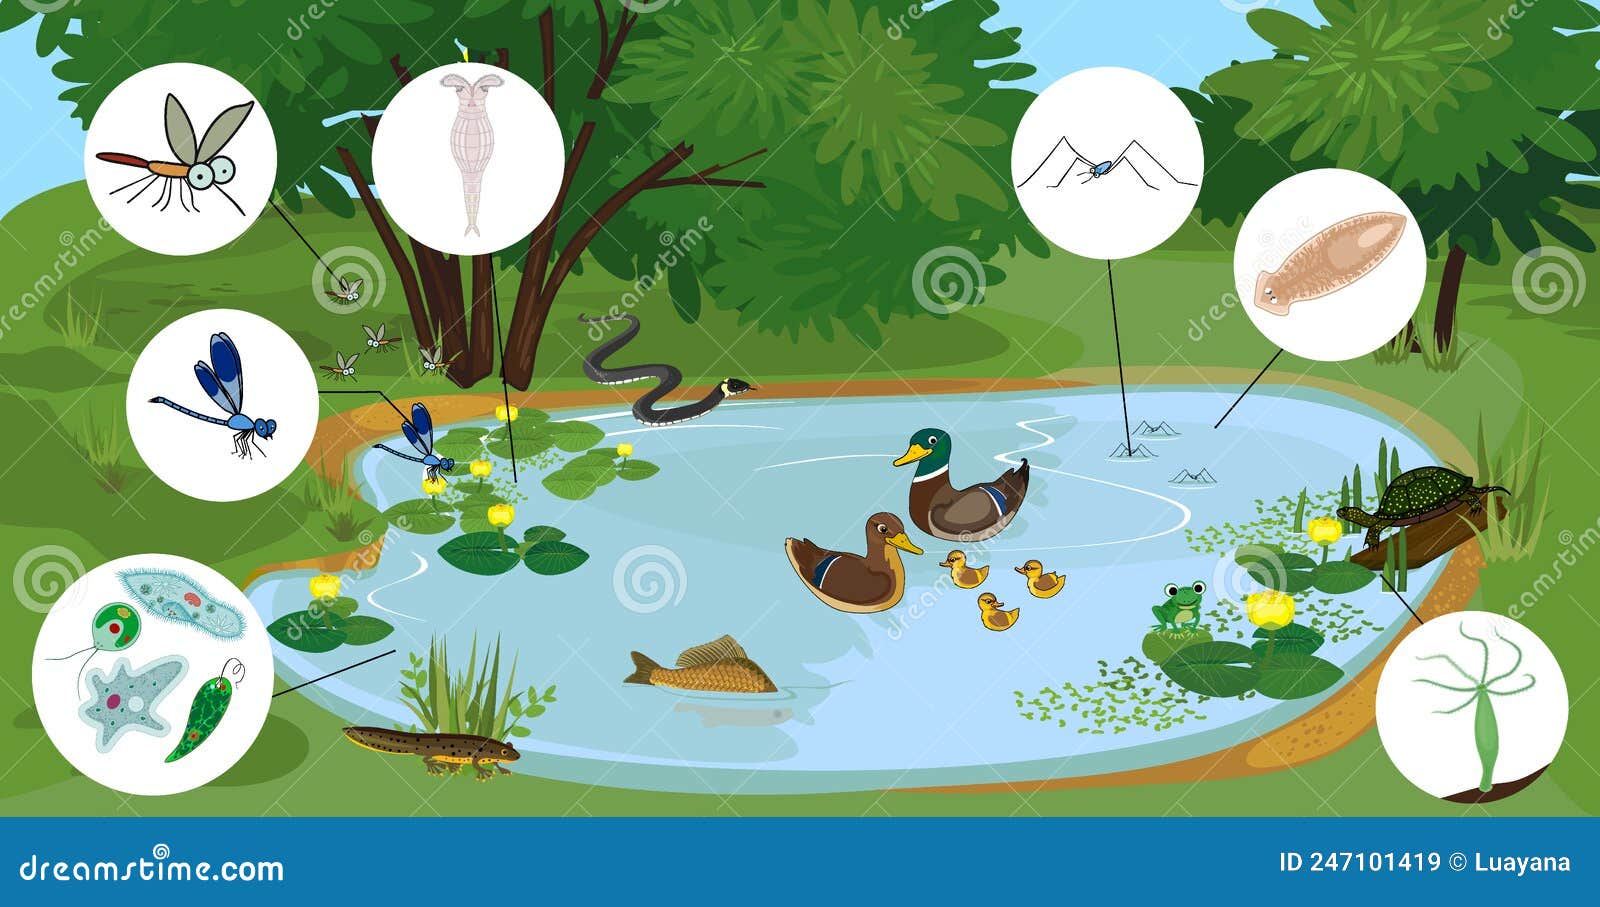 Ecosystem Pond Different Animals Birds Insects Stock Vector (Royalty Free)  2155414197 | Shutterstock